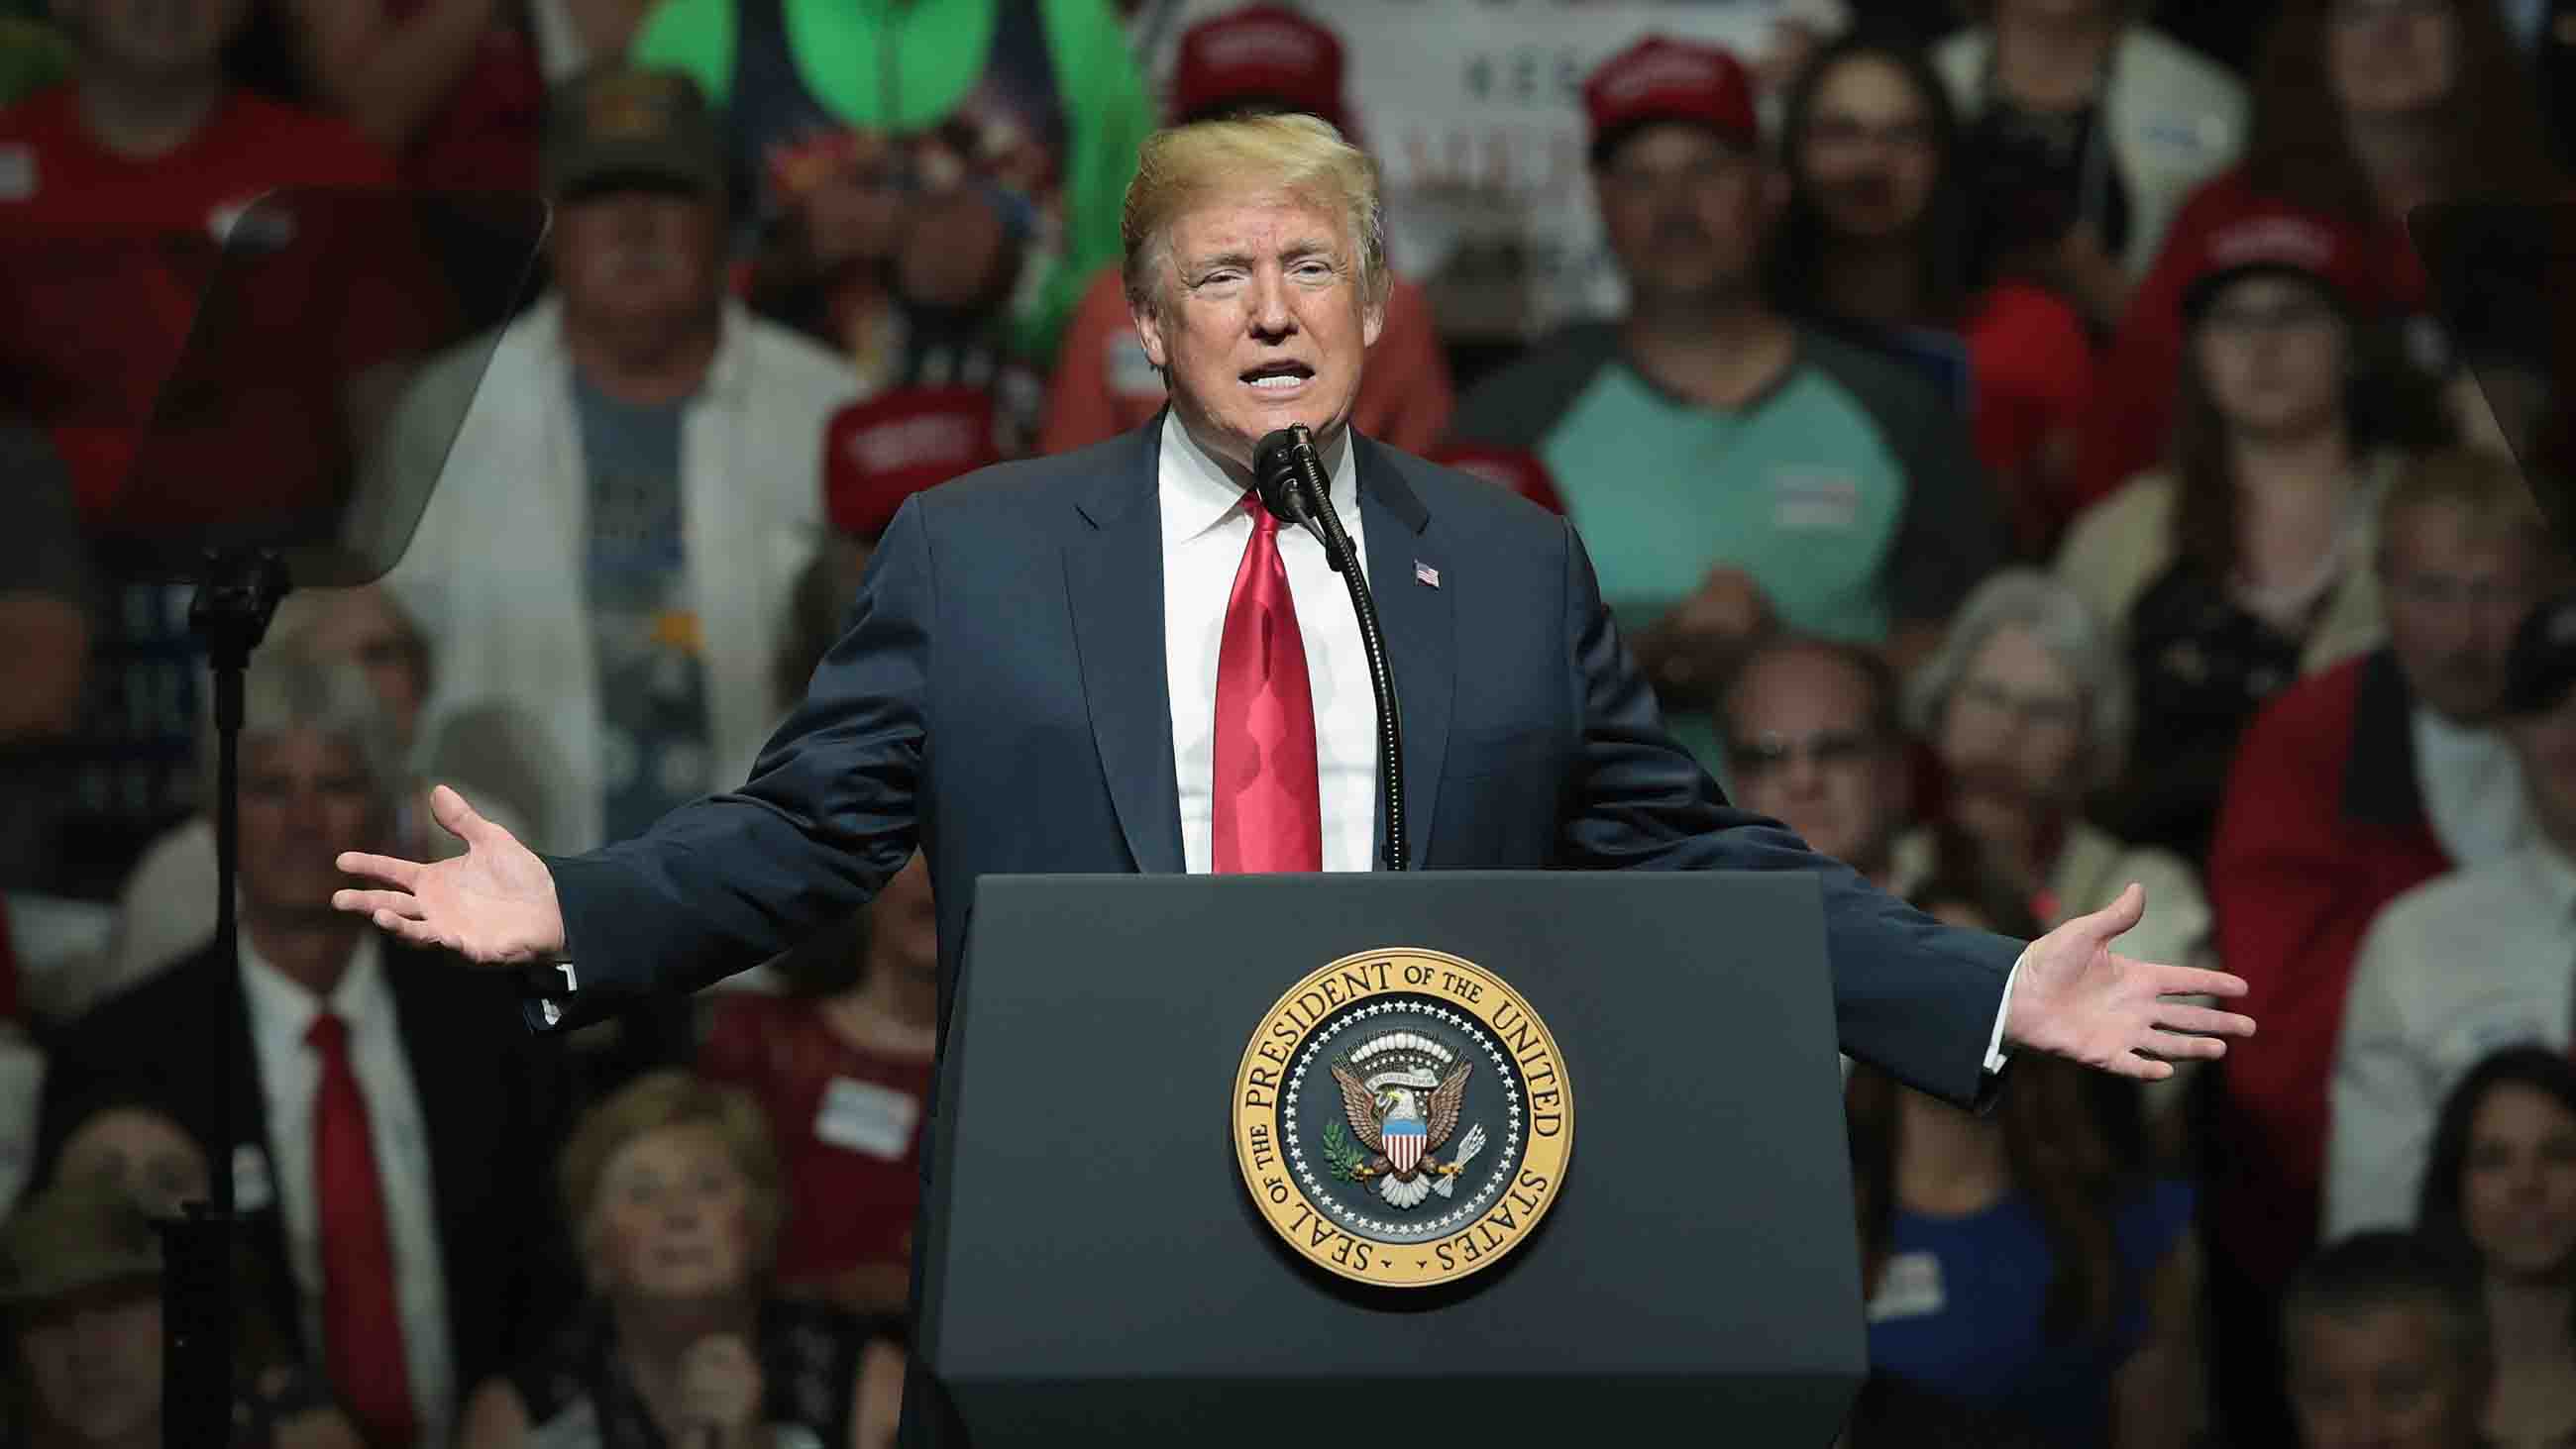 President Donald Trump speaks to supporters at a campaign rally on May 10, 2018 in Elkhart, Indiana. The crowd filled the 7,500-person-capacity gymnasium.